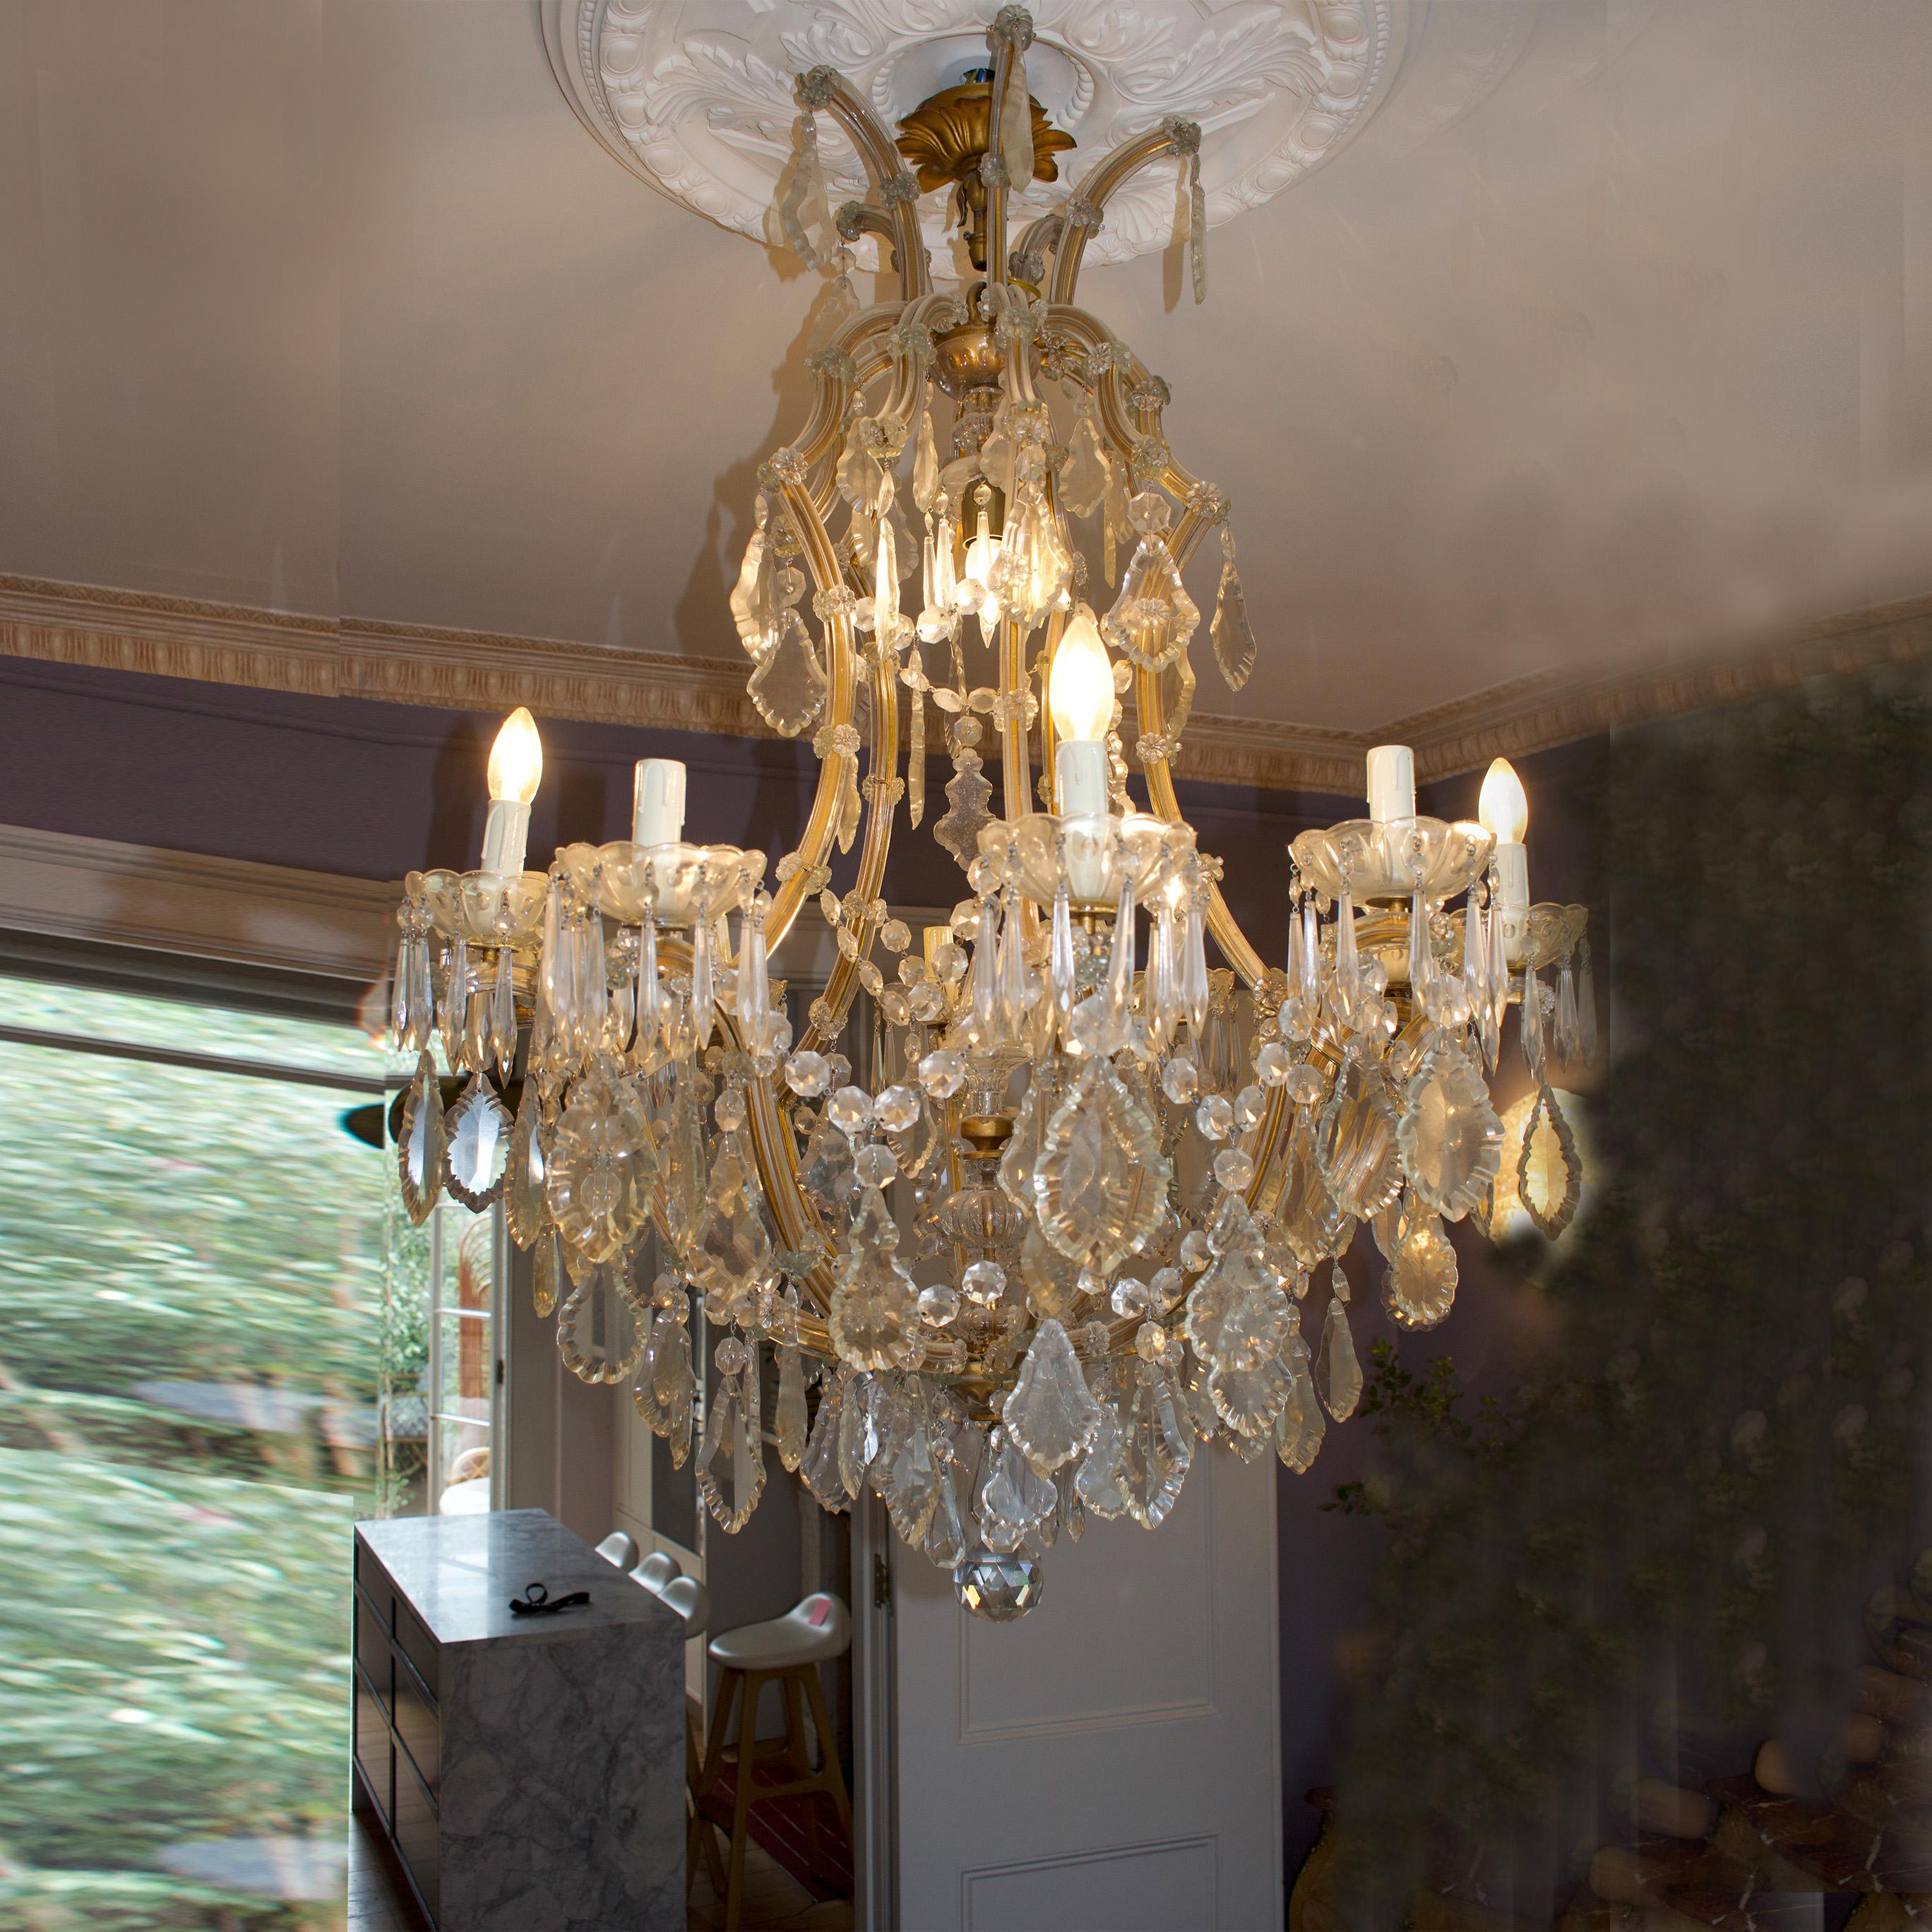 This stunning piece of artistry harks back to an era of sophistication and glamour, seamlessly blending the timeless design of the Marie-Thérèse chandelier with the chic sensibilities of 1950s France. Each tier is adorned with cascading crystal